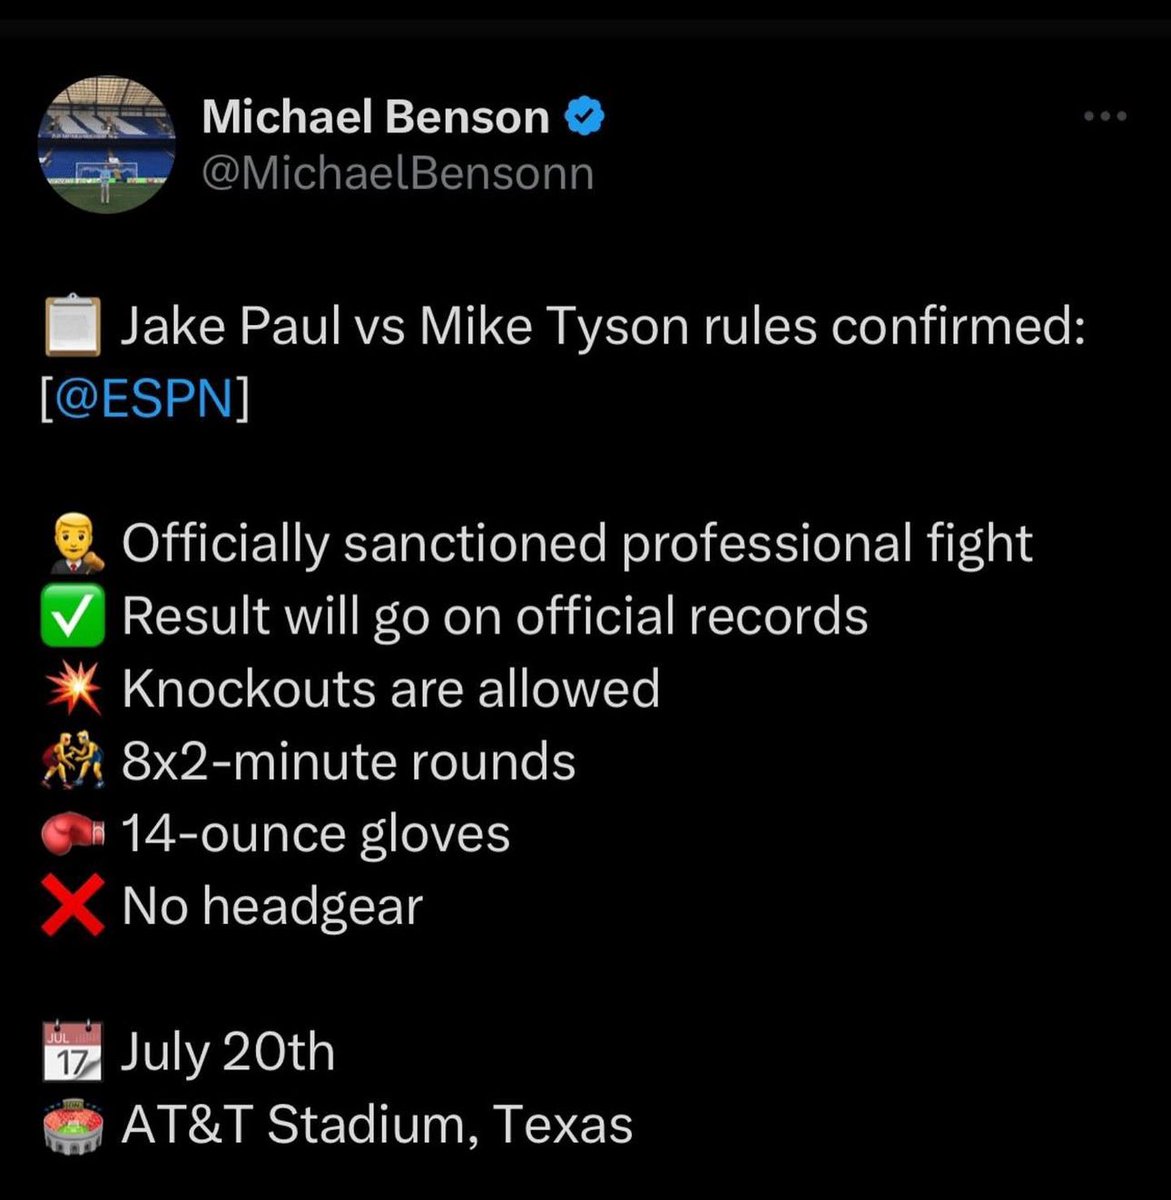 The rules for Jake v Mike Tyson just dropped
#boxingnews #jakepaul #miketyson